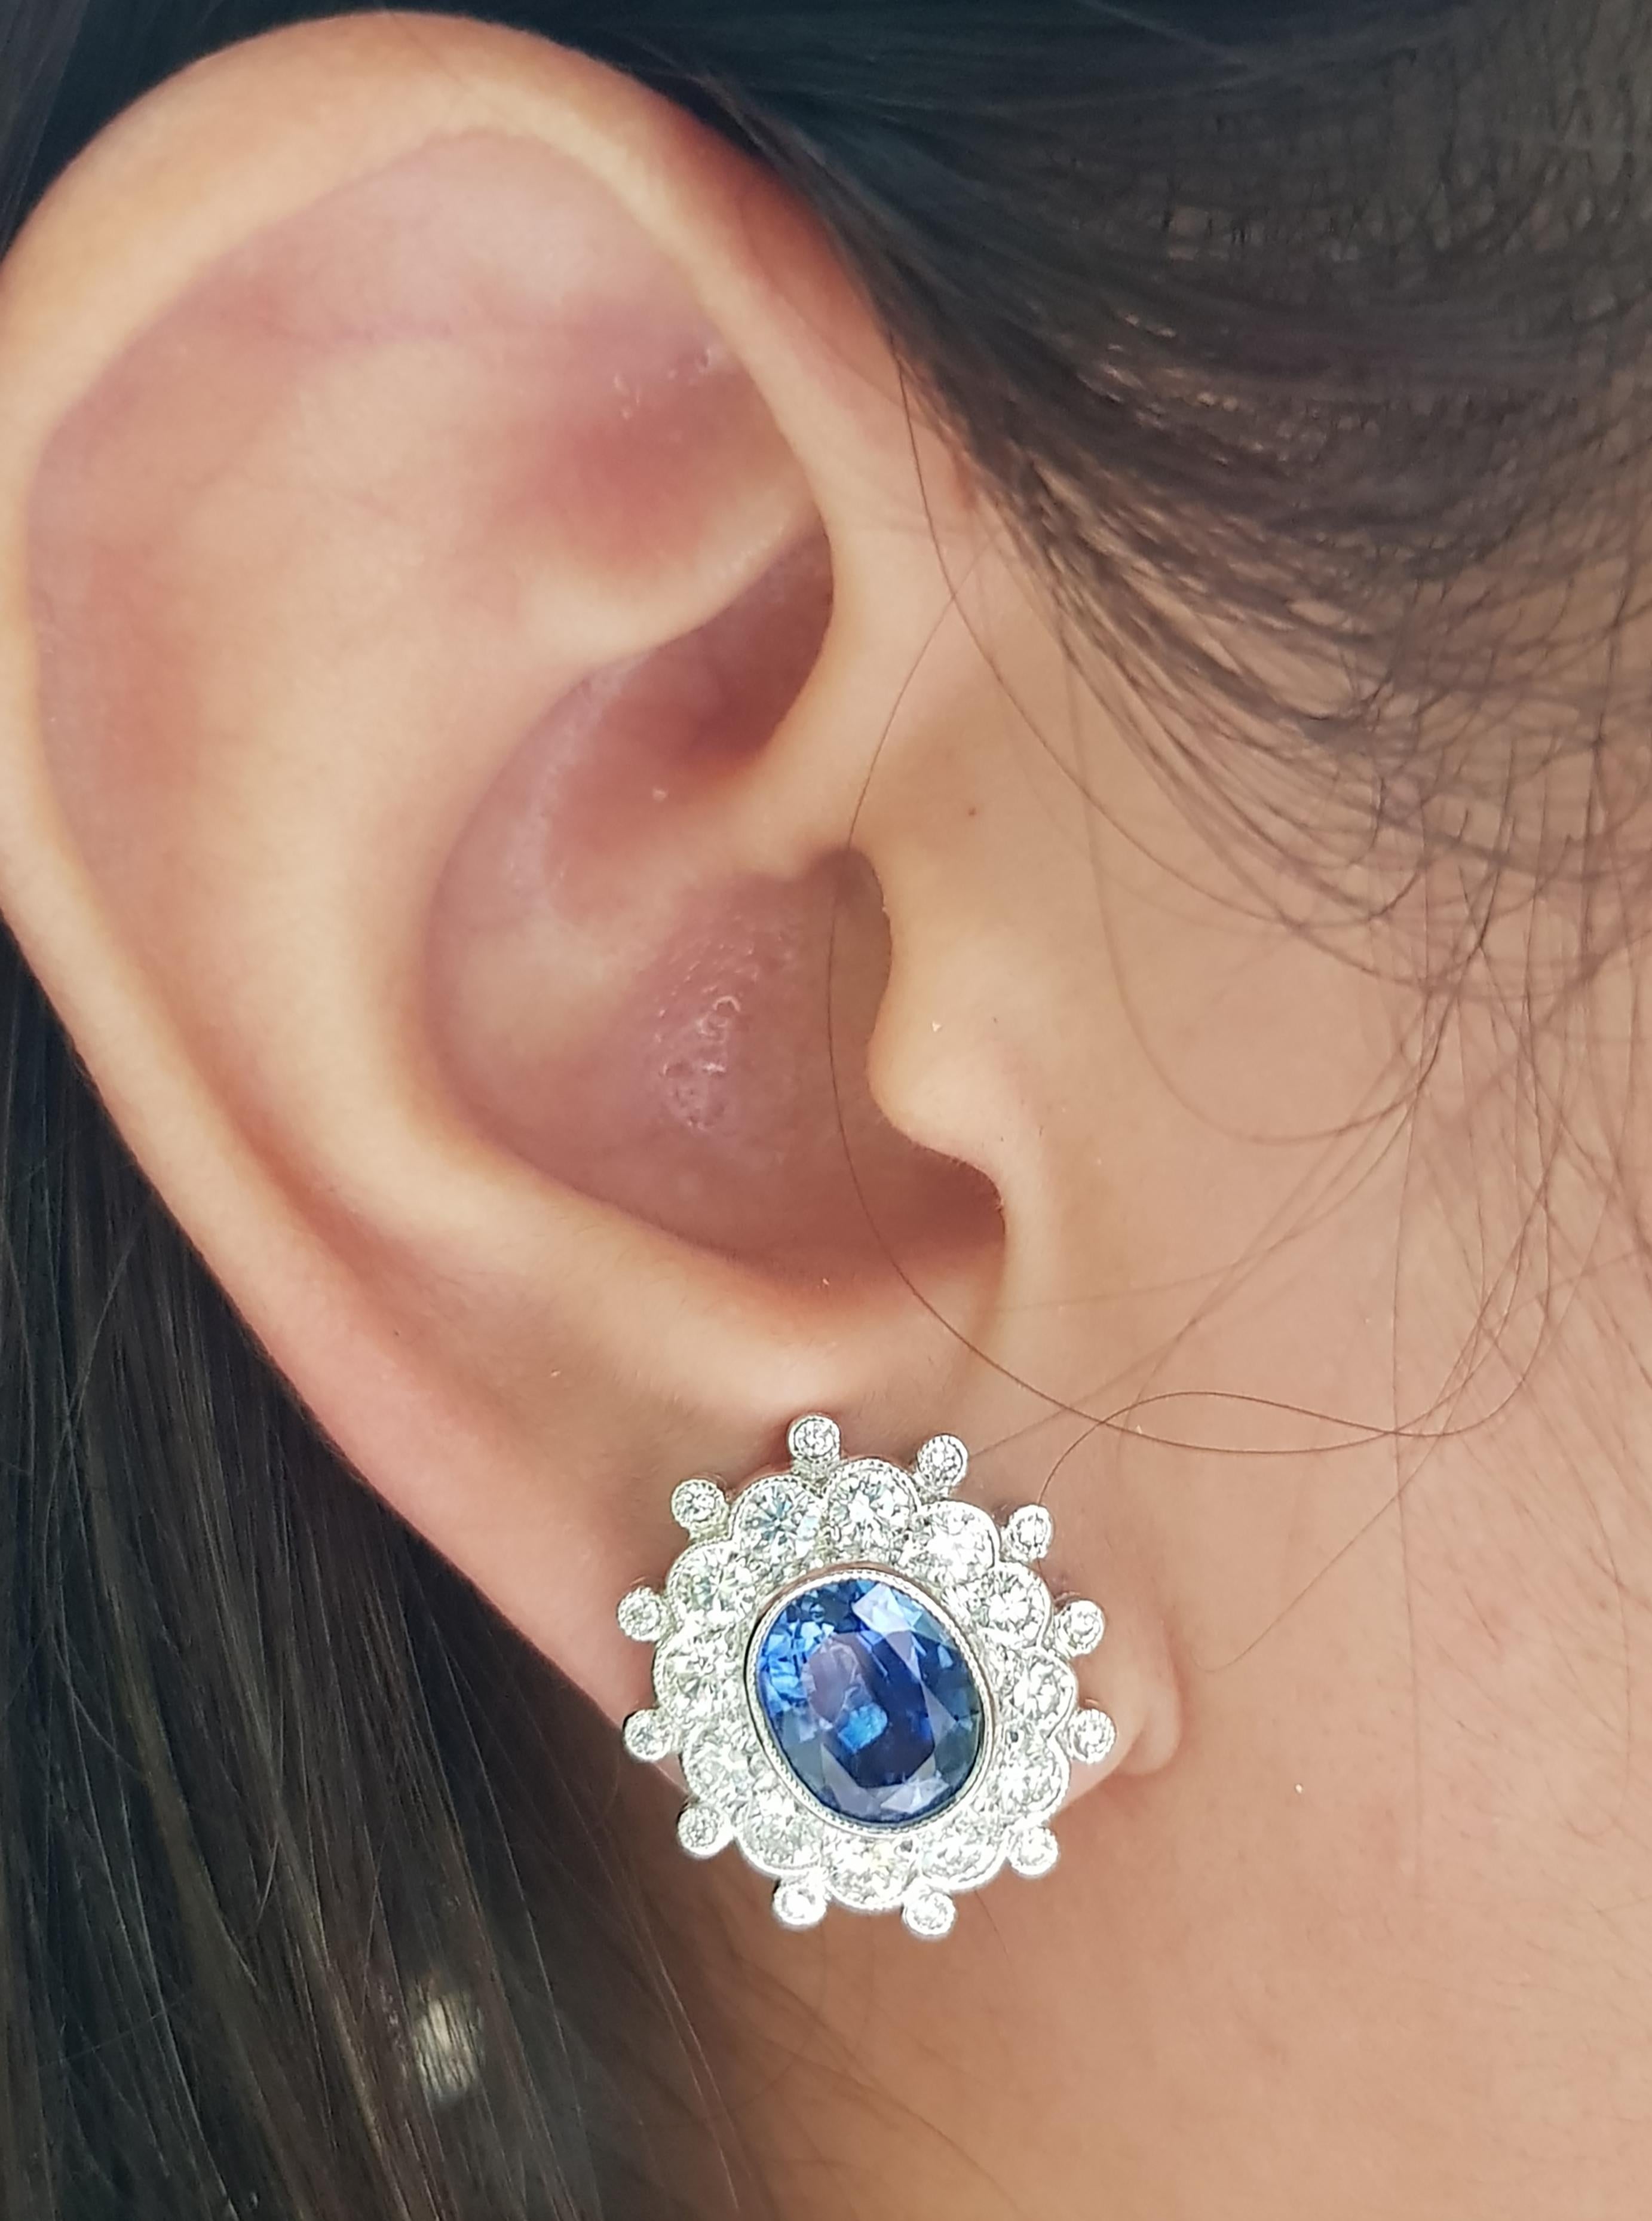 Blue Sapphire 4.55 carats with Diamond 2.06 carats Earrings set in 18 Karat White Gold Settings

Width:  1.9 cm 
Length: 1.7 cm
Total Weight: 10.11 grams

